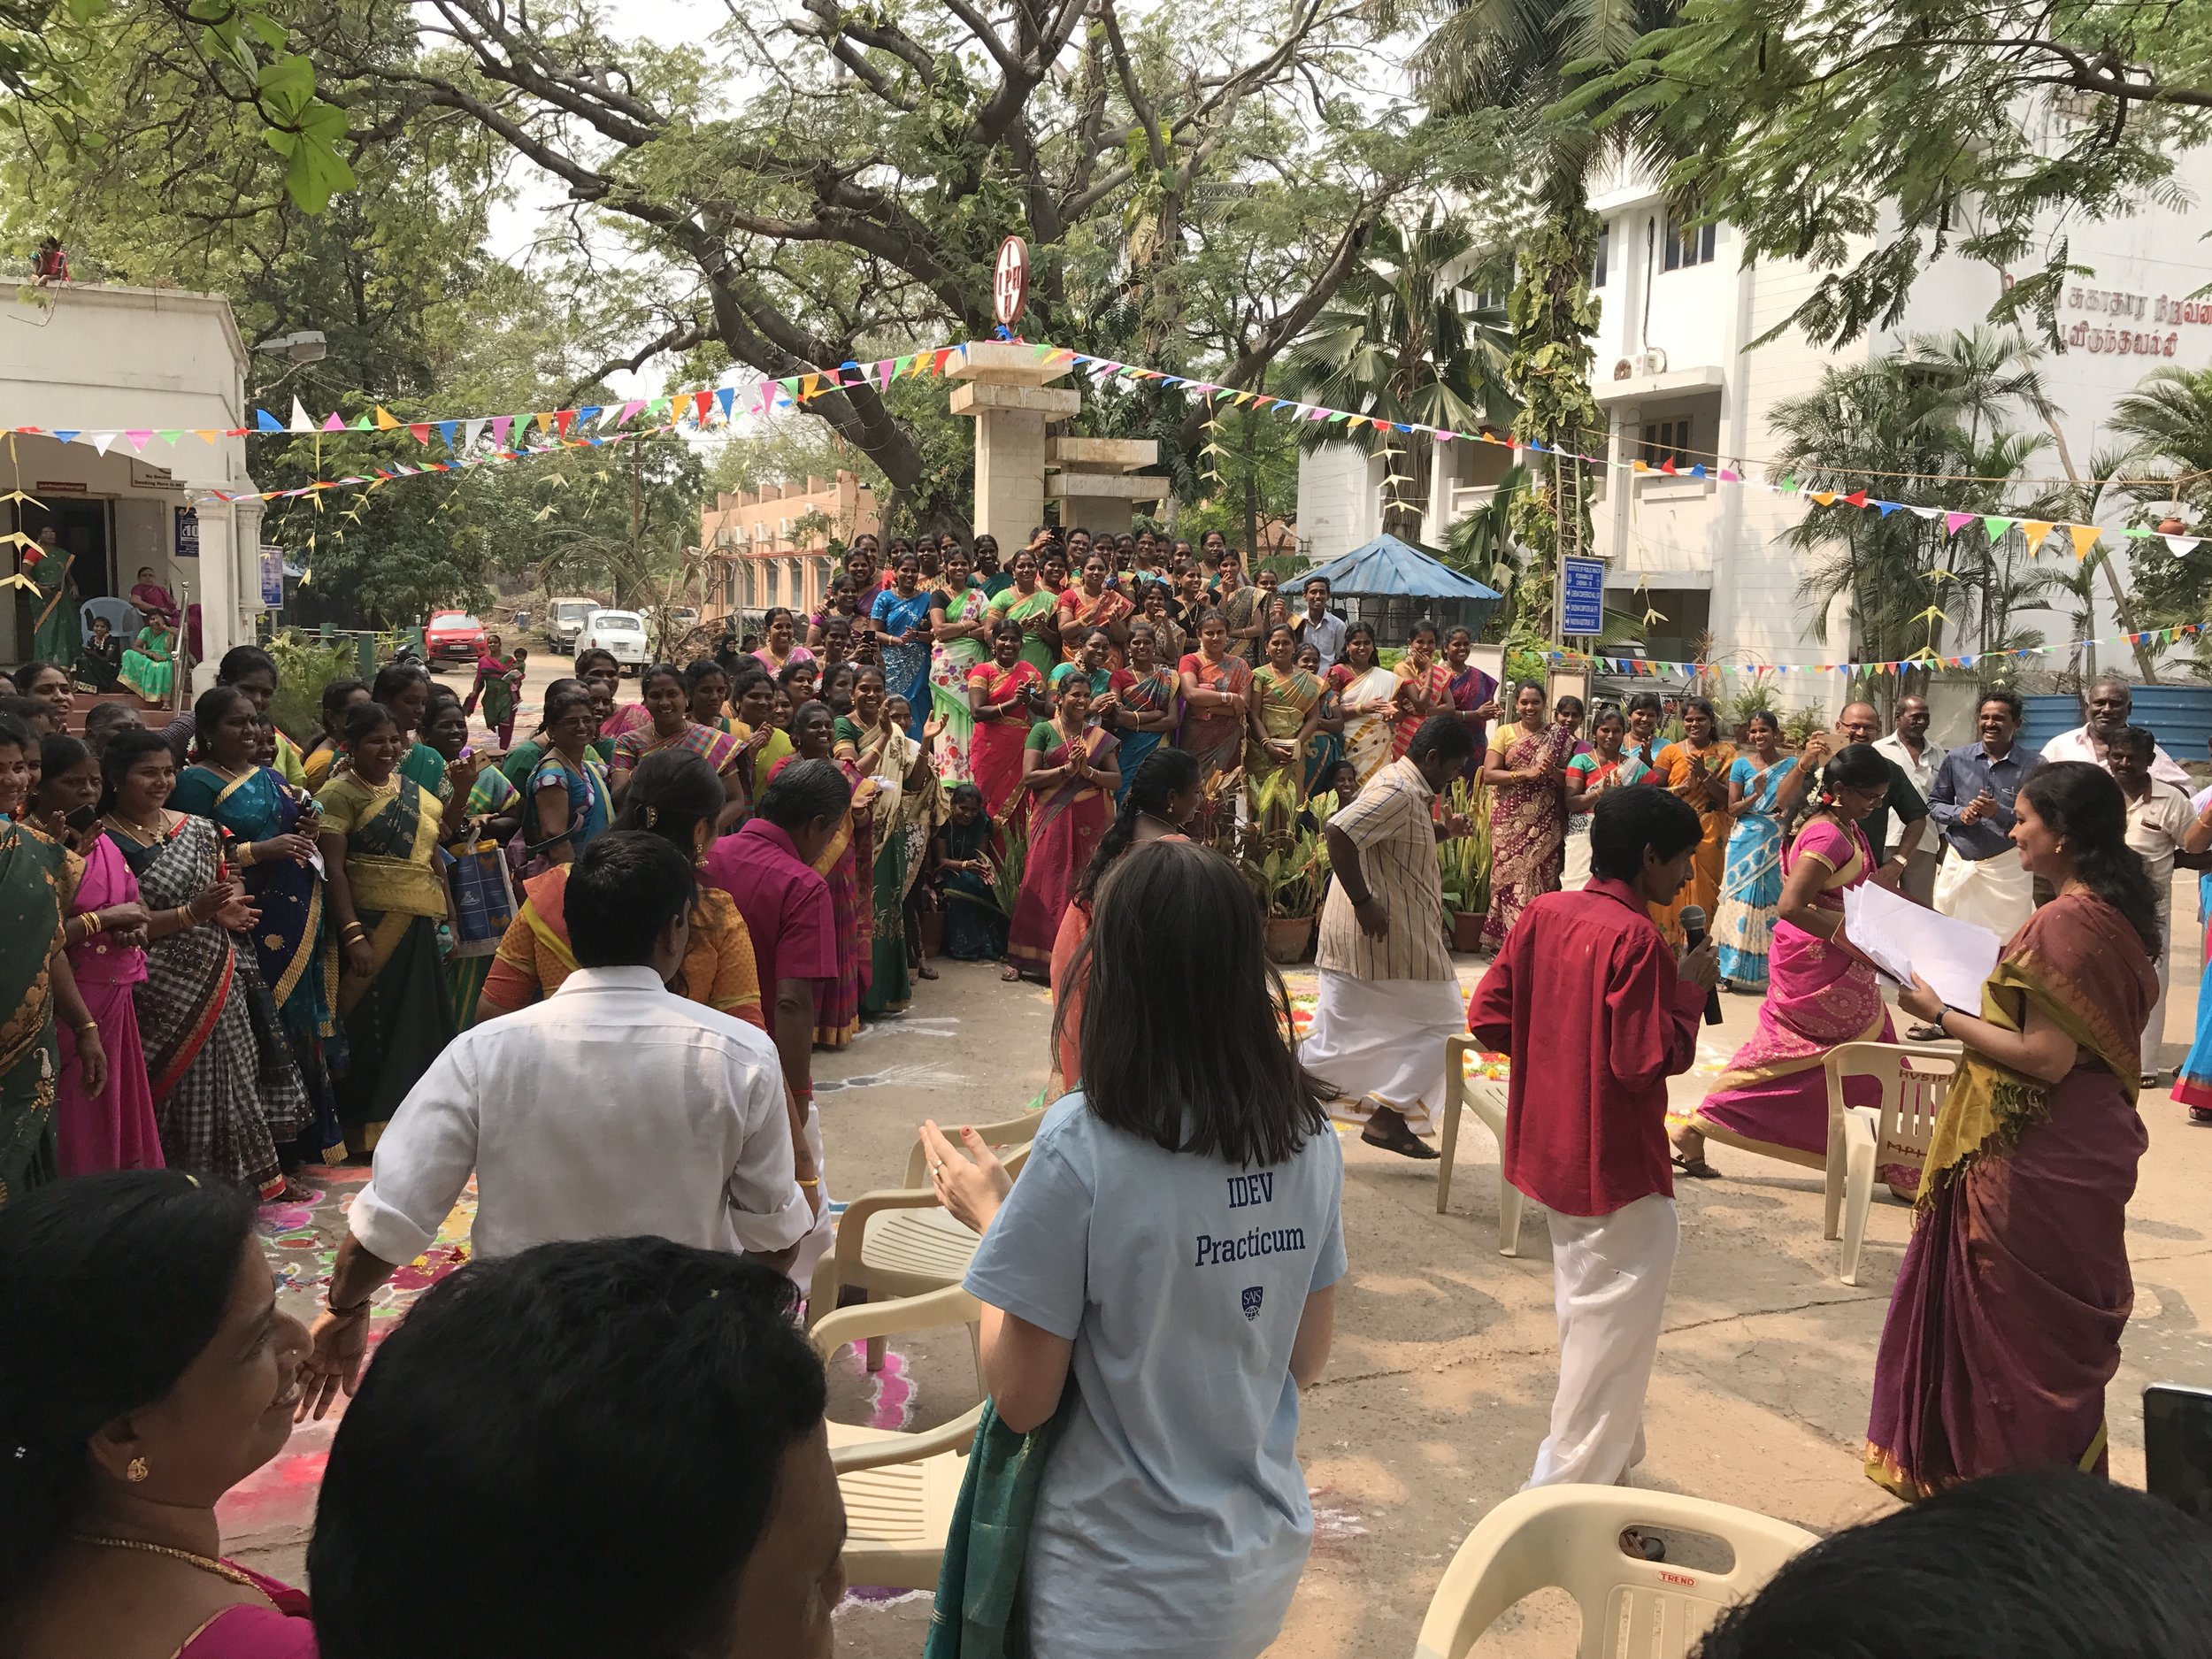  Practicum Team members joined in on the fun and games:&nbsp;playing musical chairs, learning dance moves, and eating the traditional meal of Chakkara Pongal, a delicious sweet rice dish cooked in milk with raisins and spices.&nbsp; 